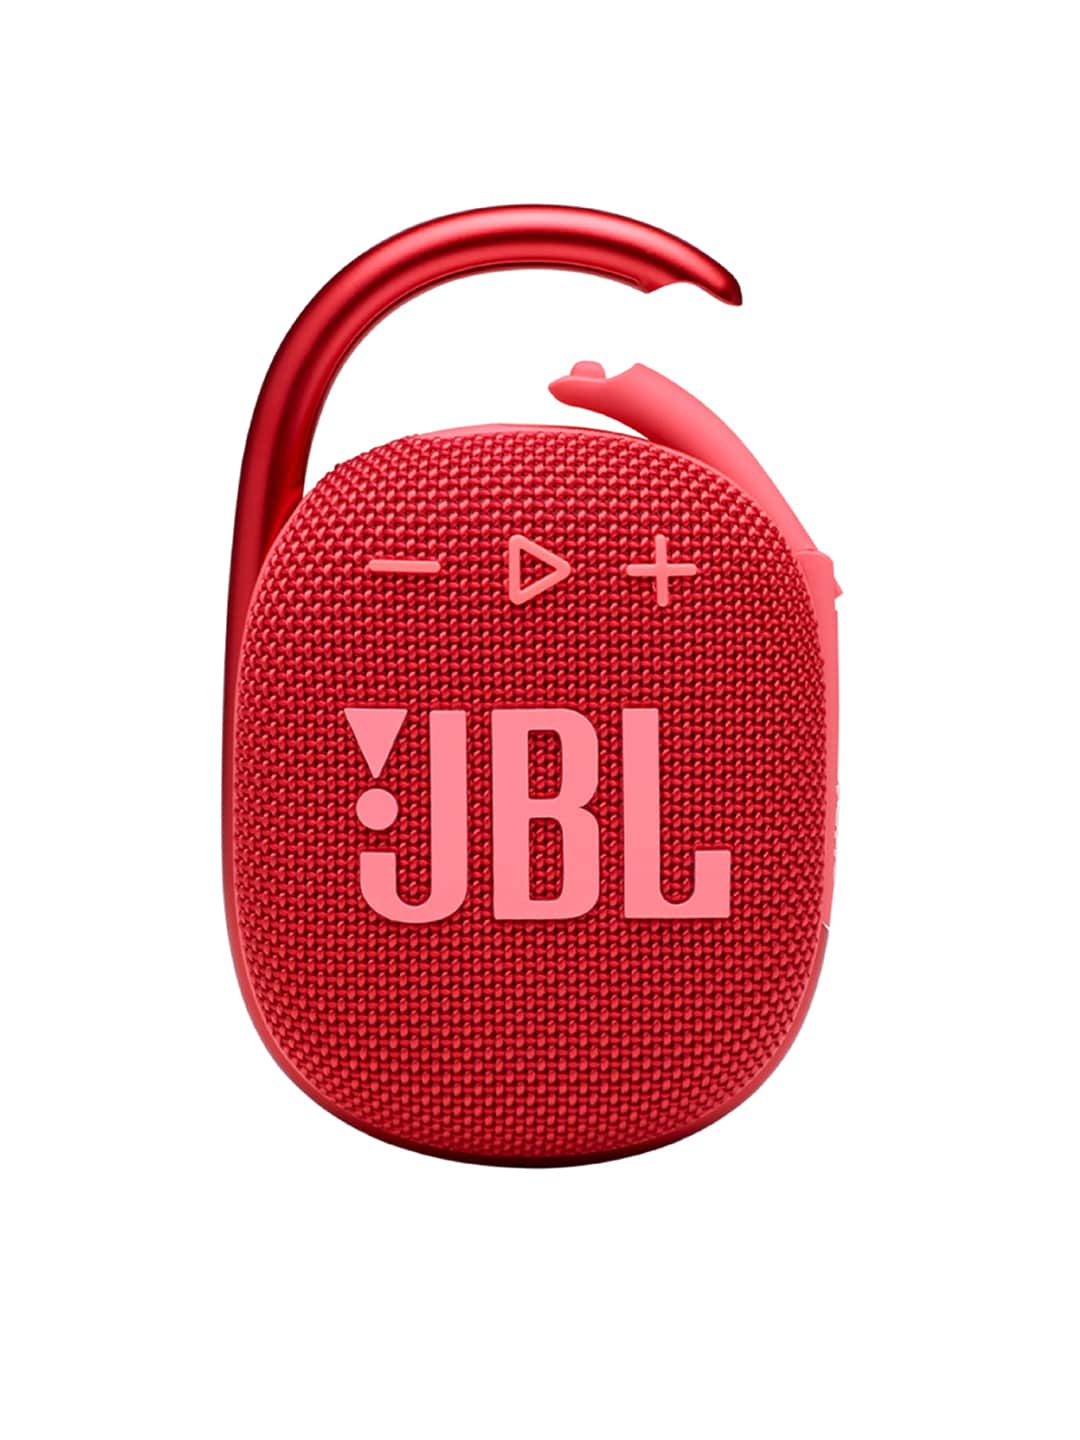 JBL Red Clip 4 Ultra-Portable IP67 Bluetooth Speaker with Upto 10 Hours Playtime Price in India